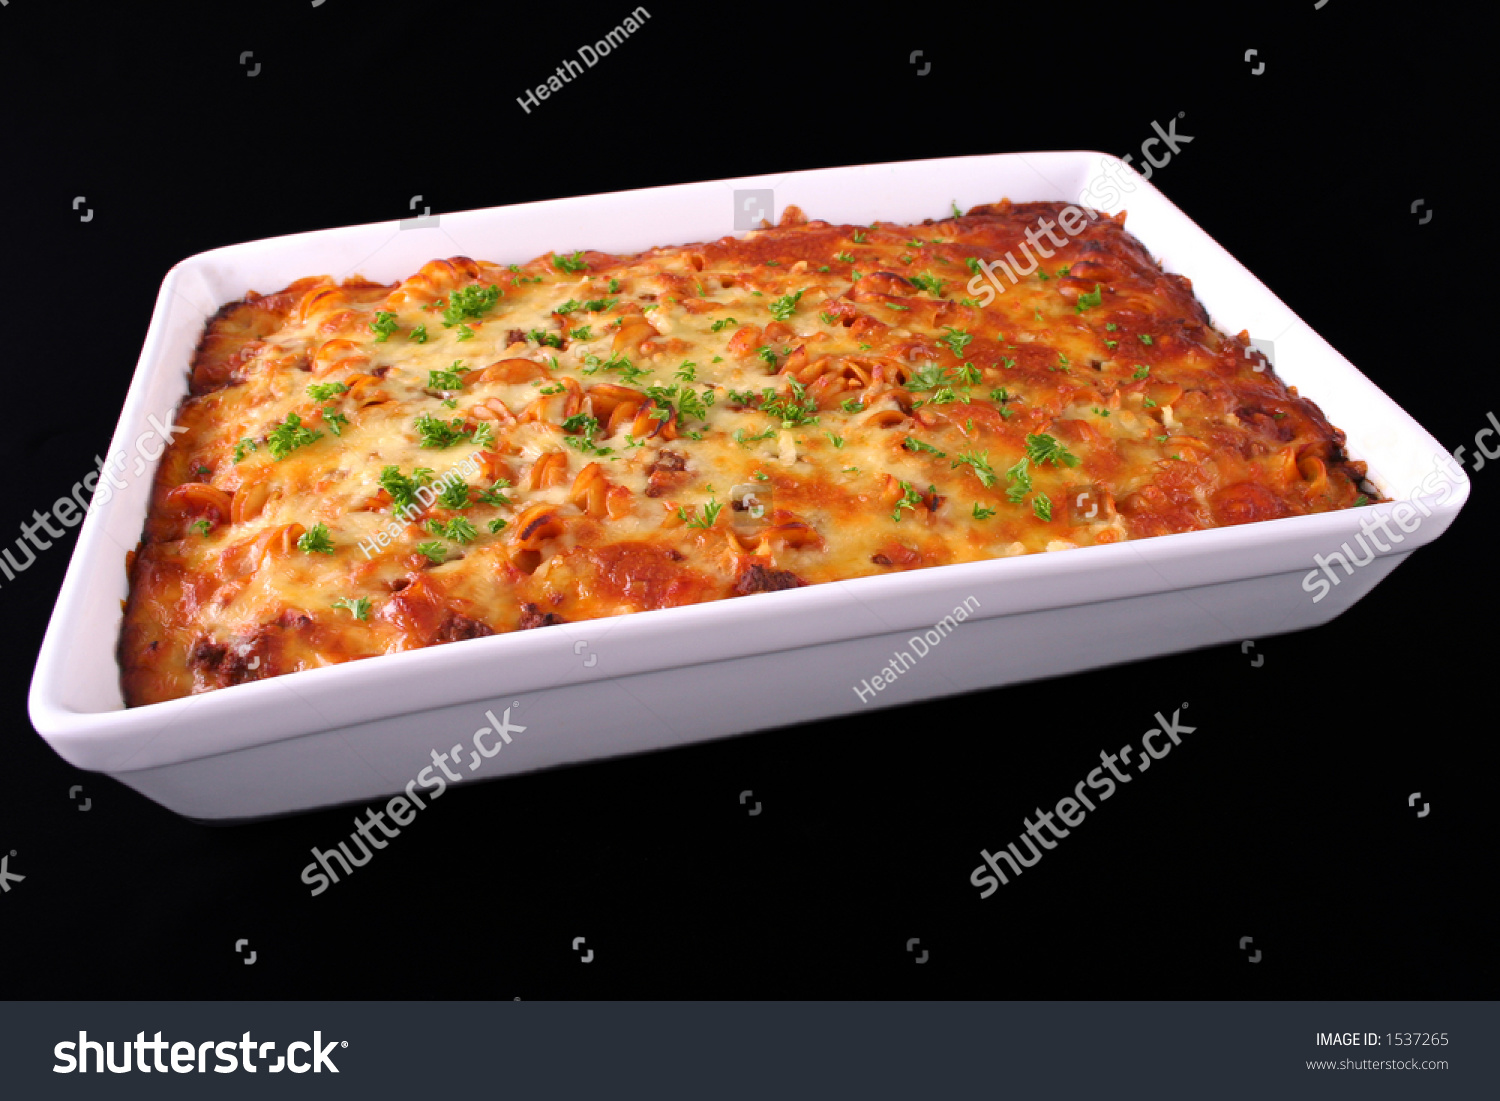 A Tray Of Freshly Cooked Pasta Bake Isolated On An Angle Stock Photo ...